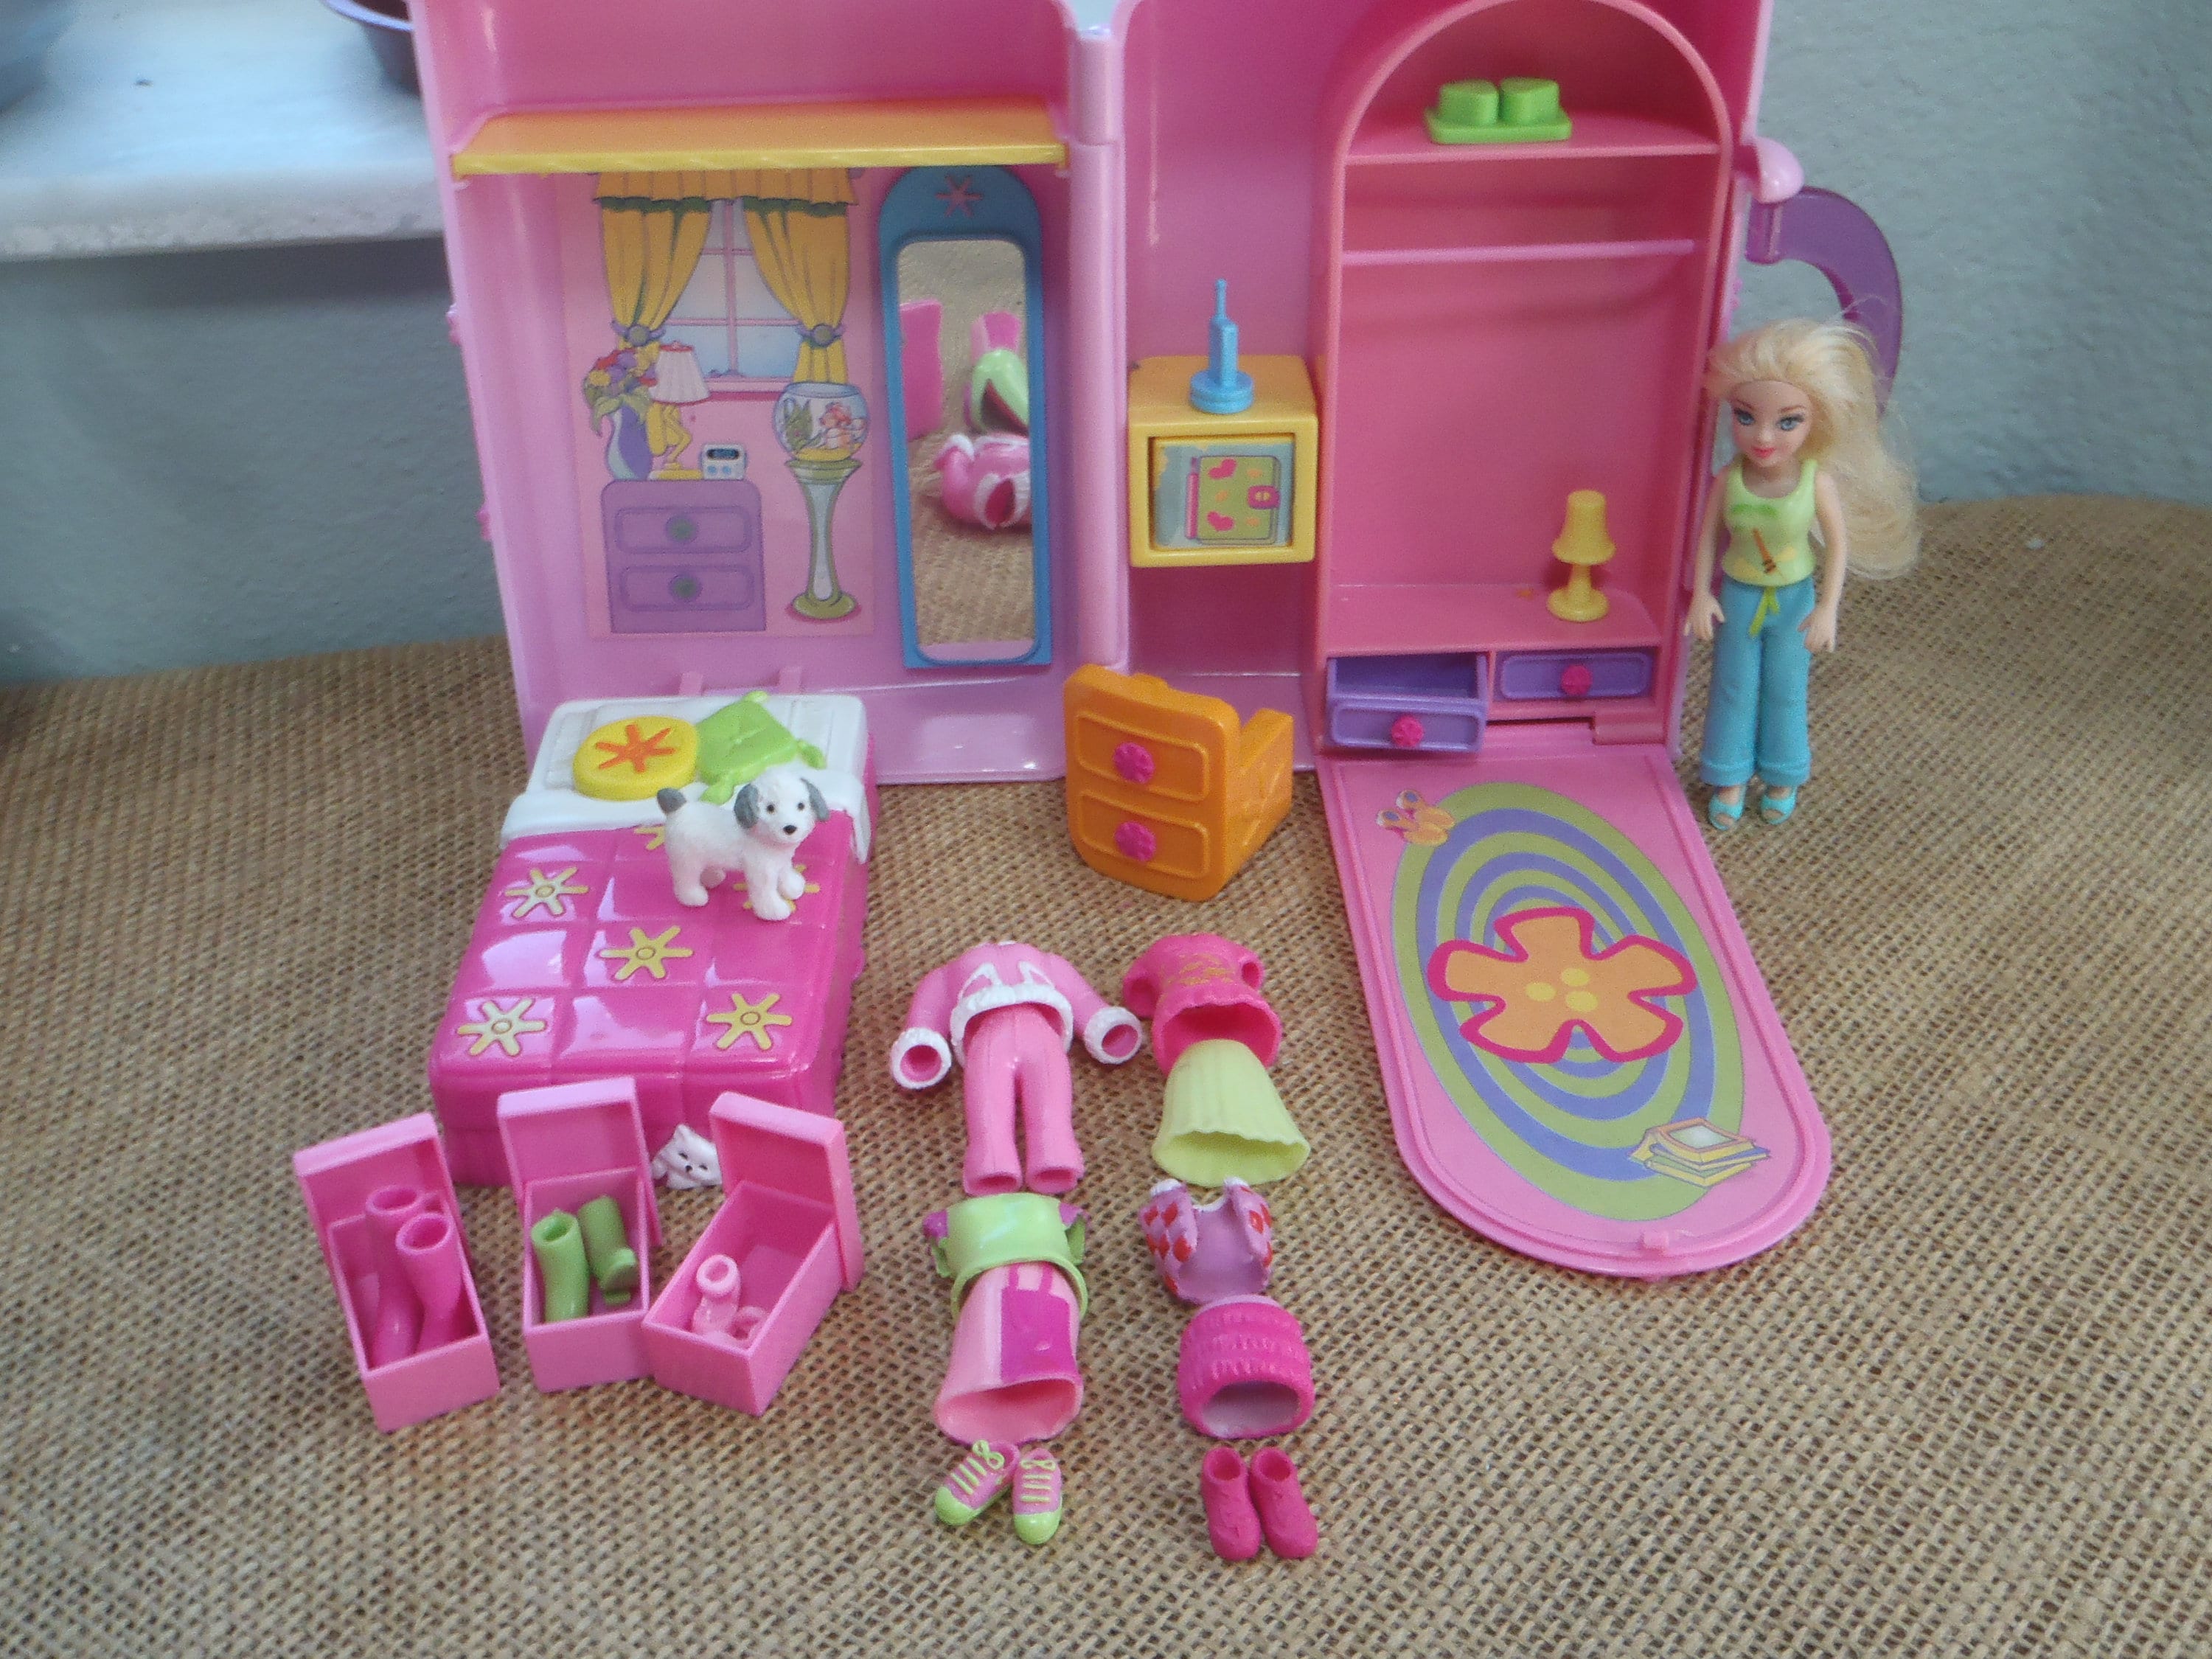 Polly Pocket Playset & 2 Dolls (3-inch), Candy Style Fashion Drop Vending  Machine, 2-Stories, 35+ Pieces of Furniture, Clothes & Accessories (